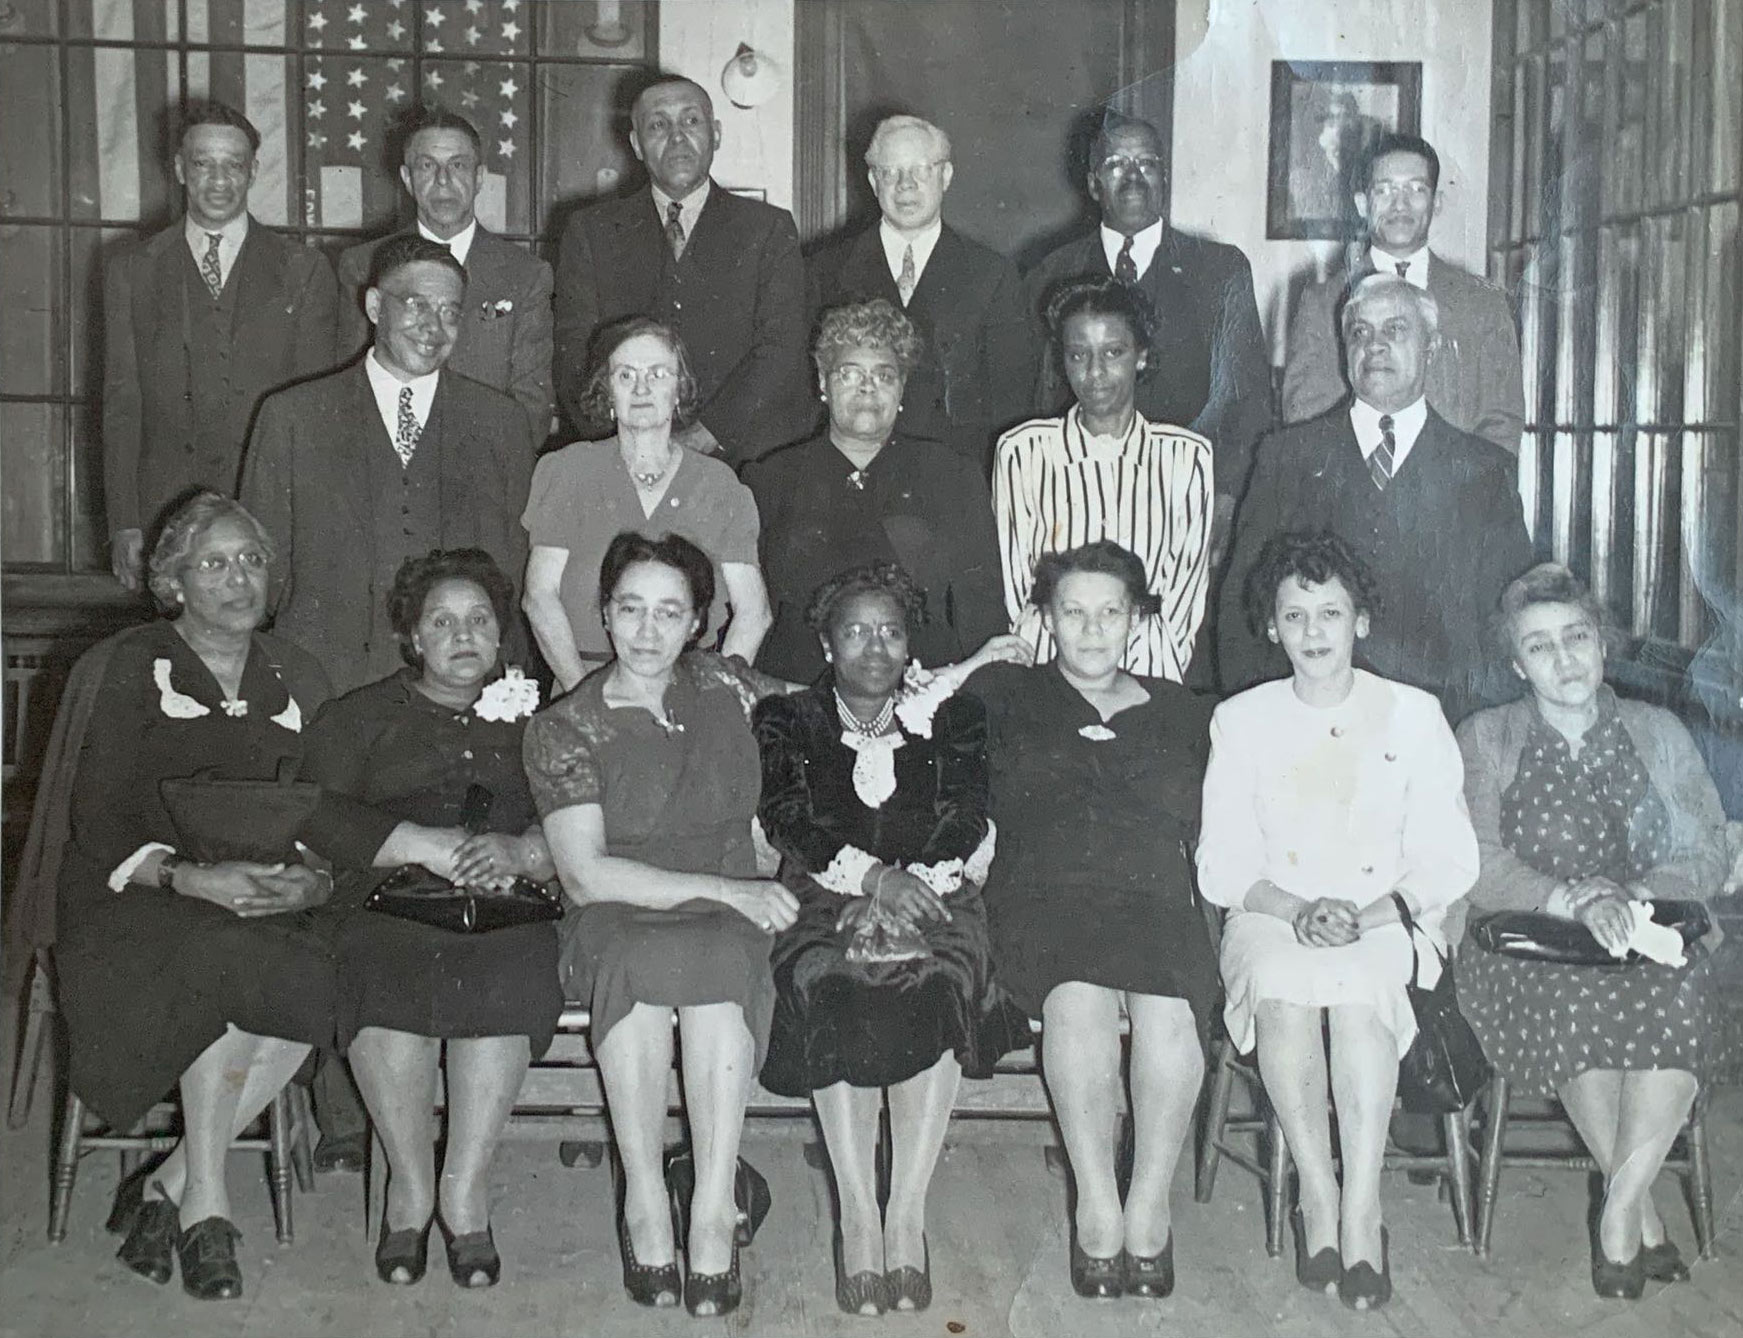 Members of the South Shore Citizens Club